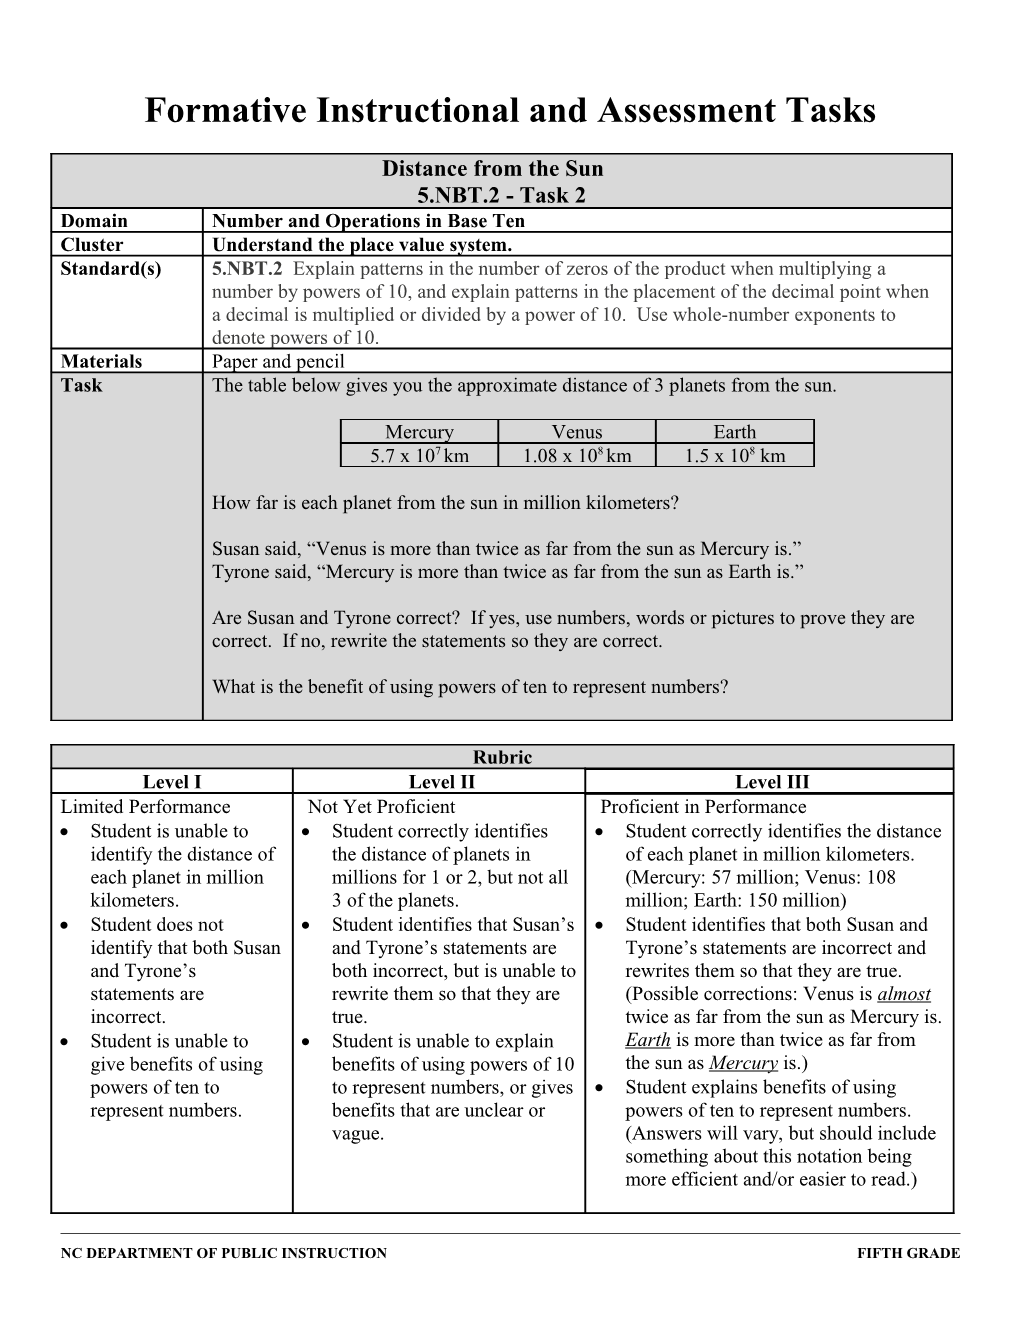 Formative Instructional and Assessment Tasks s22